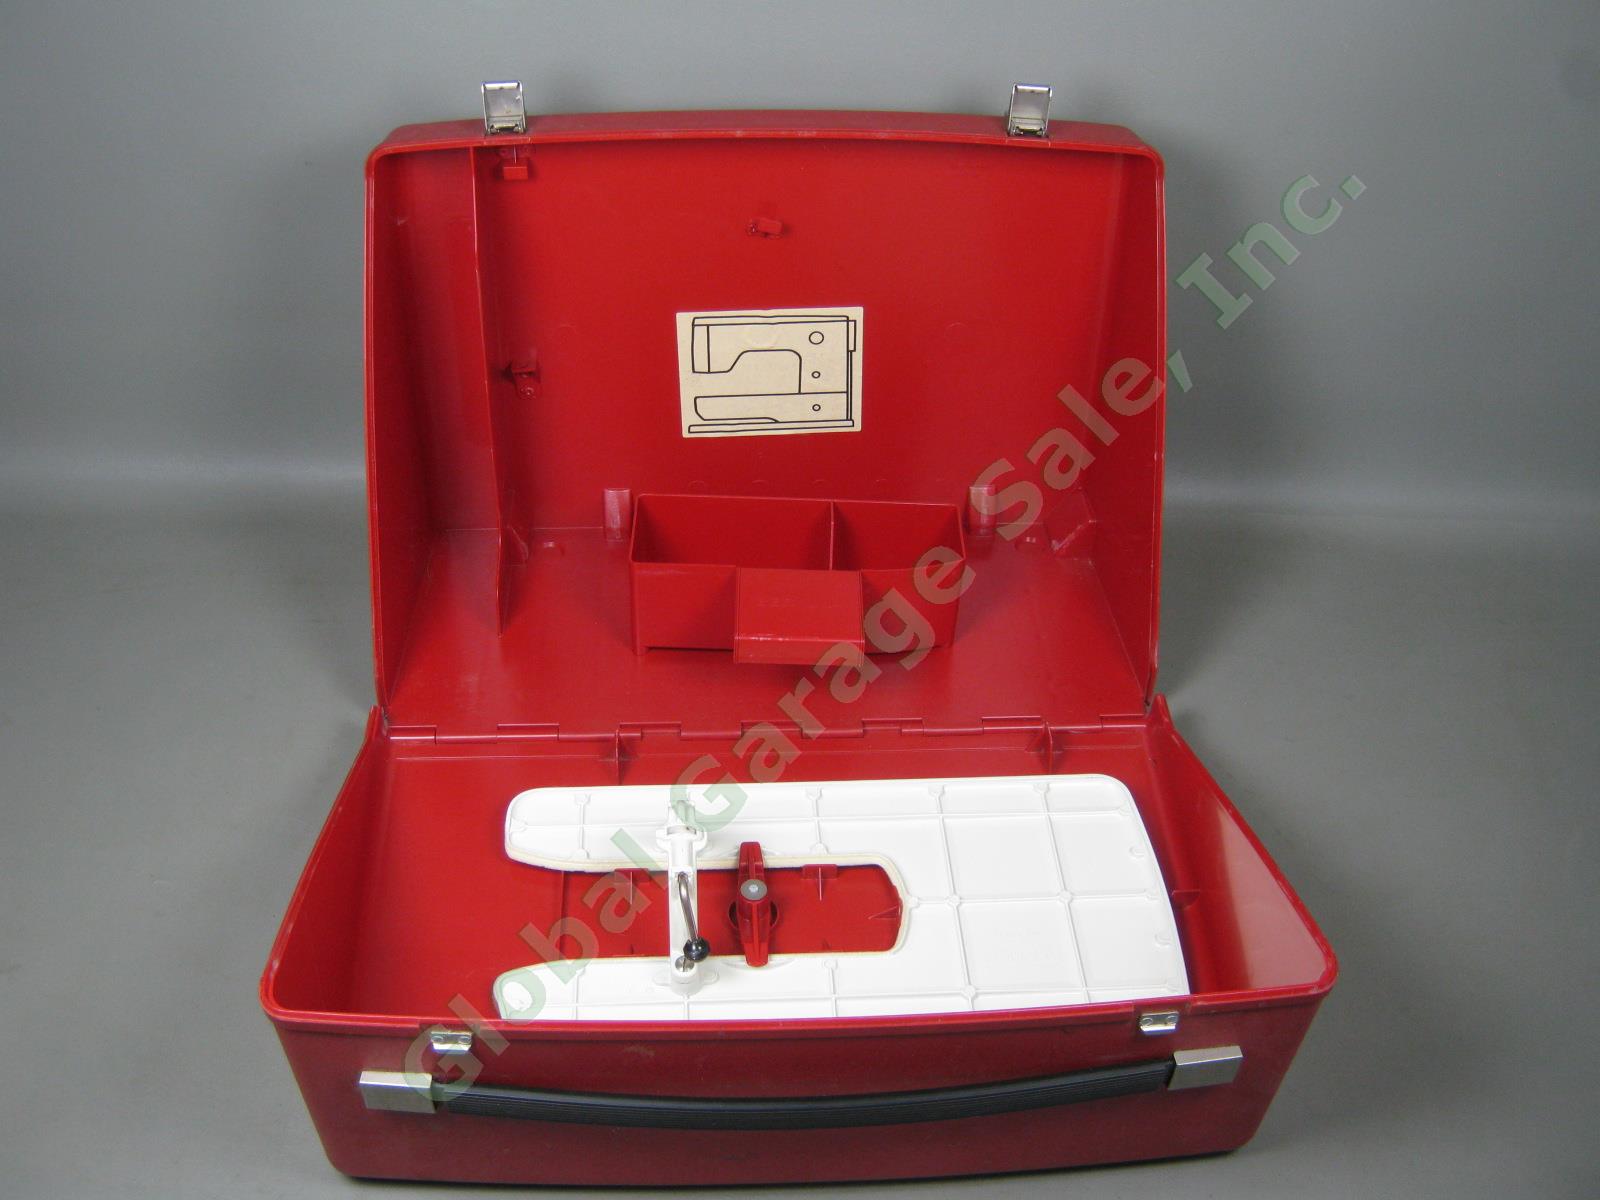 Red Bernina Hard Shell Plastic Sewing Machine Record Carrying Case ONLY 830? NR! 4